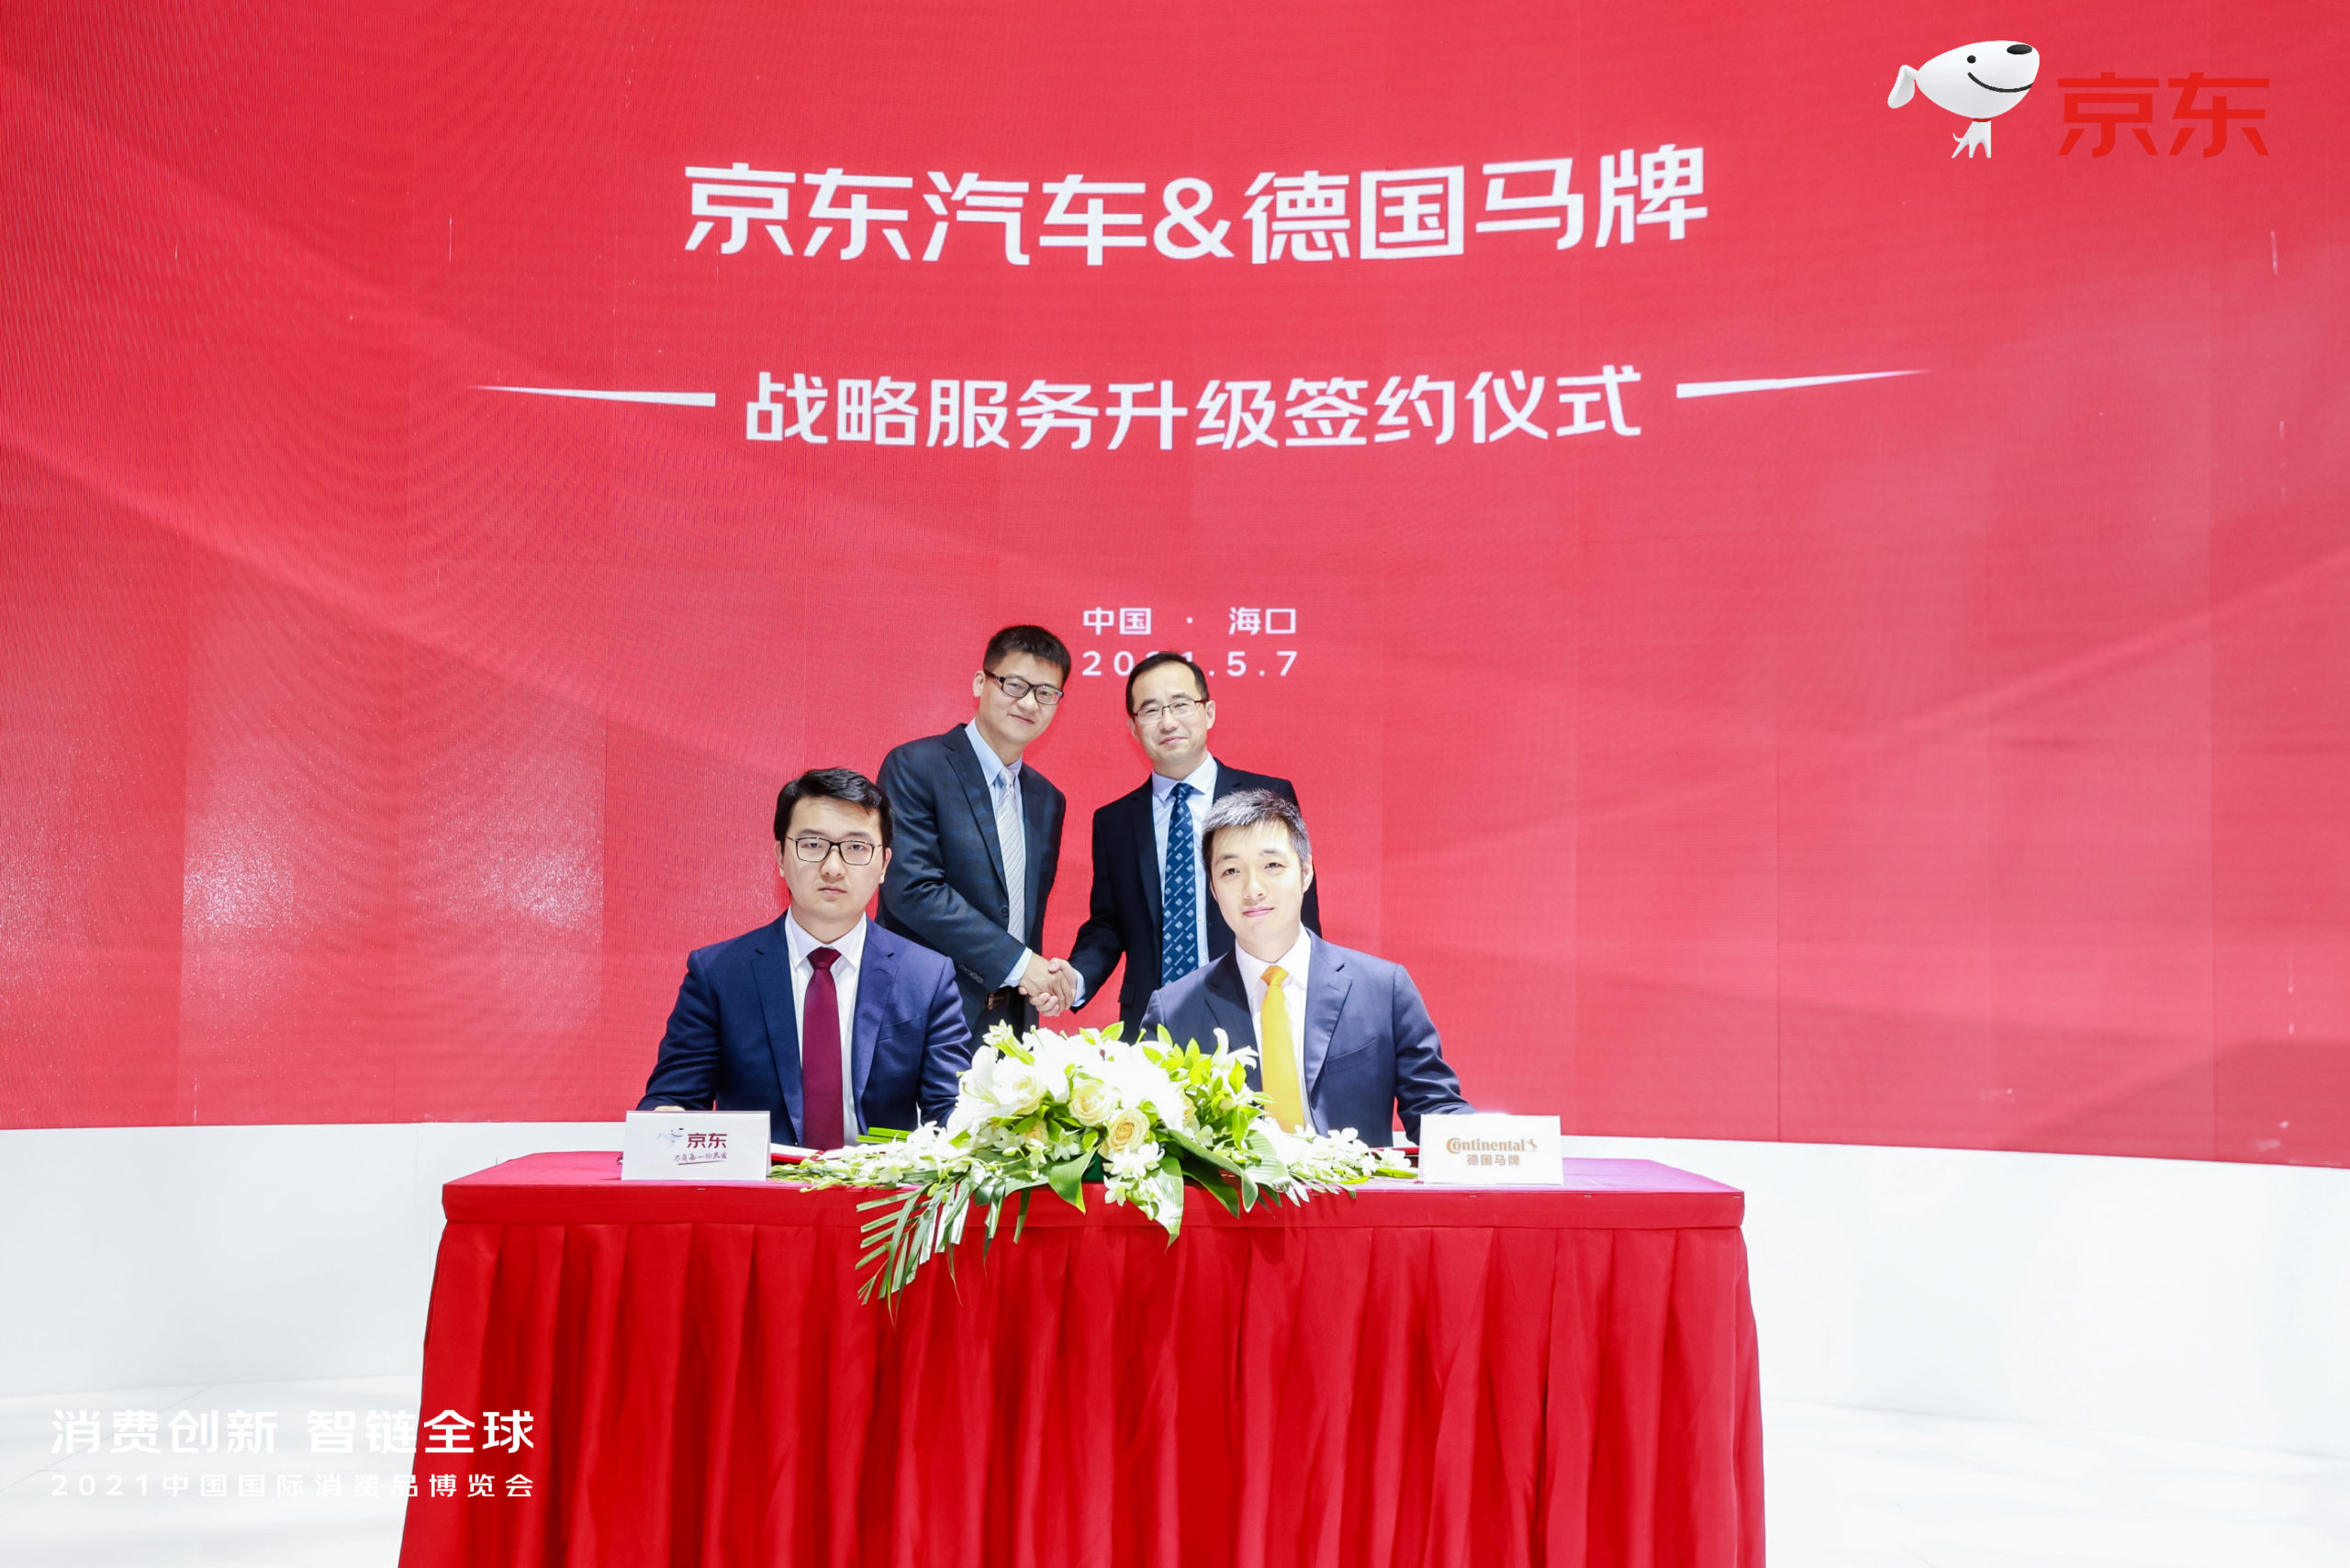 From left to right:   Minxian Wang, general manager, self-operated automotive products, JD Auto;Qin Miu, vice president and head of life & service business division of JD.com; Yifeng Zhao, e-commerce department, Continental China; Mingyou Tang, head of sales, Continental China.